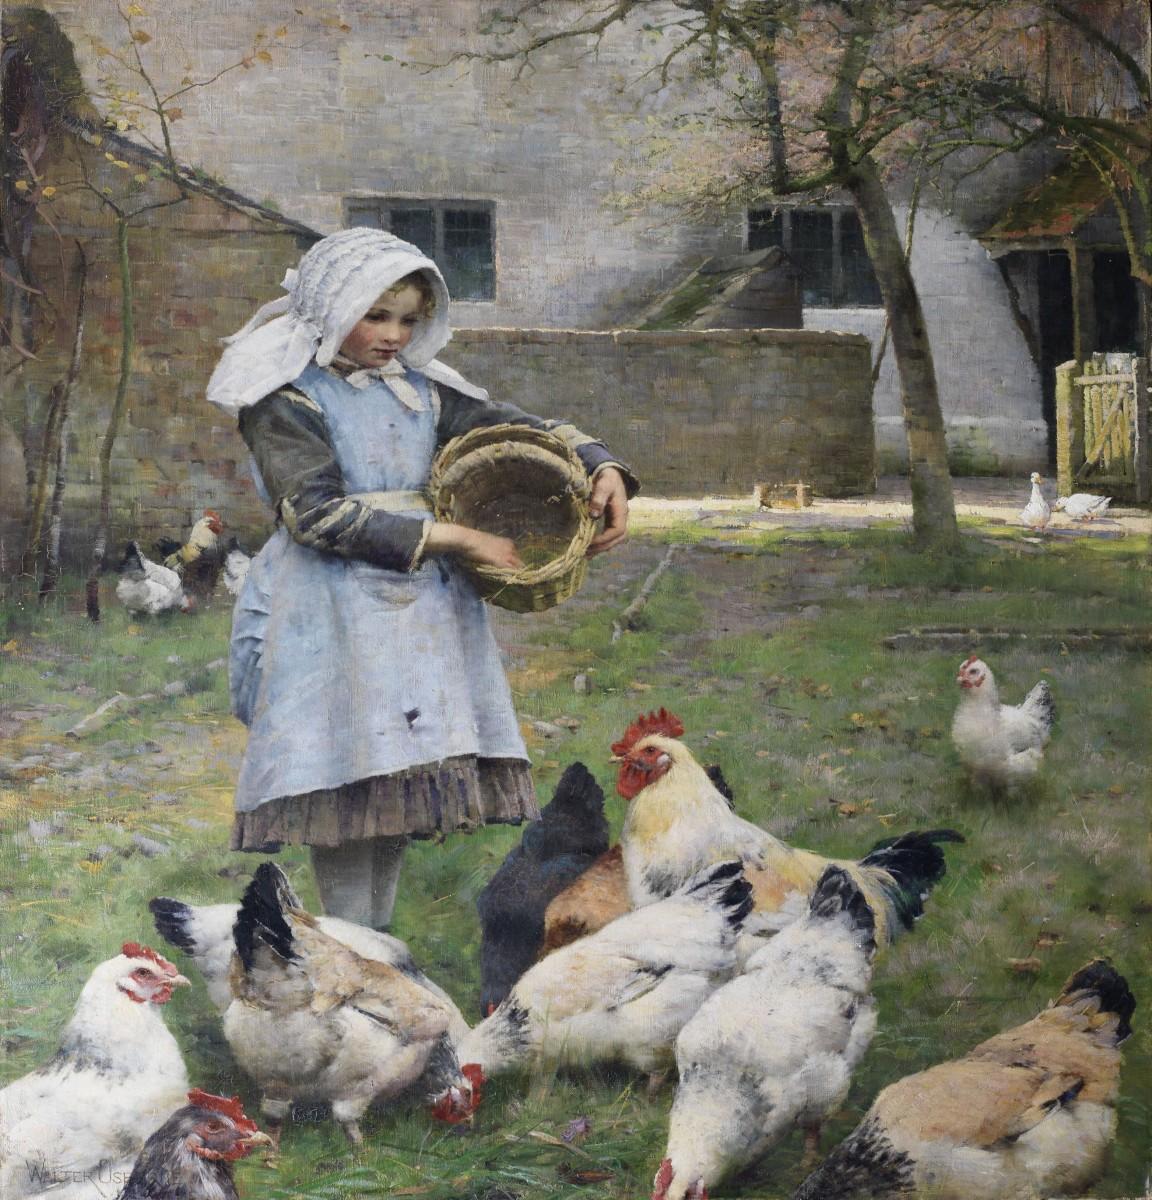 <a><img class="size-large wp-image-1785252" title="feeding-the-chickens" src="https://www.theepochtimes.com/assets/uploads/2015/09/feeding-the-chickens.jpg" alt="" width="566" height="590"/></a>